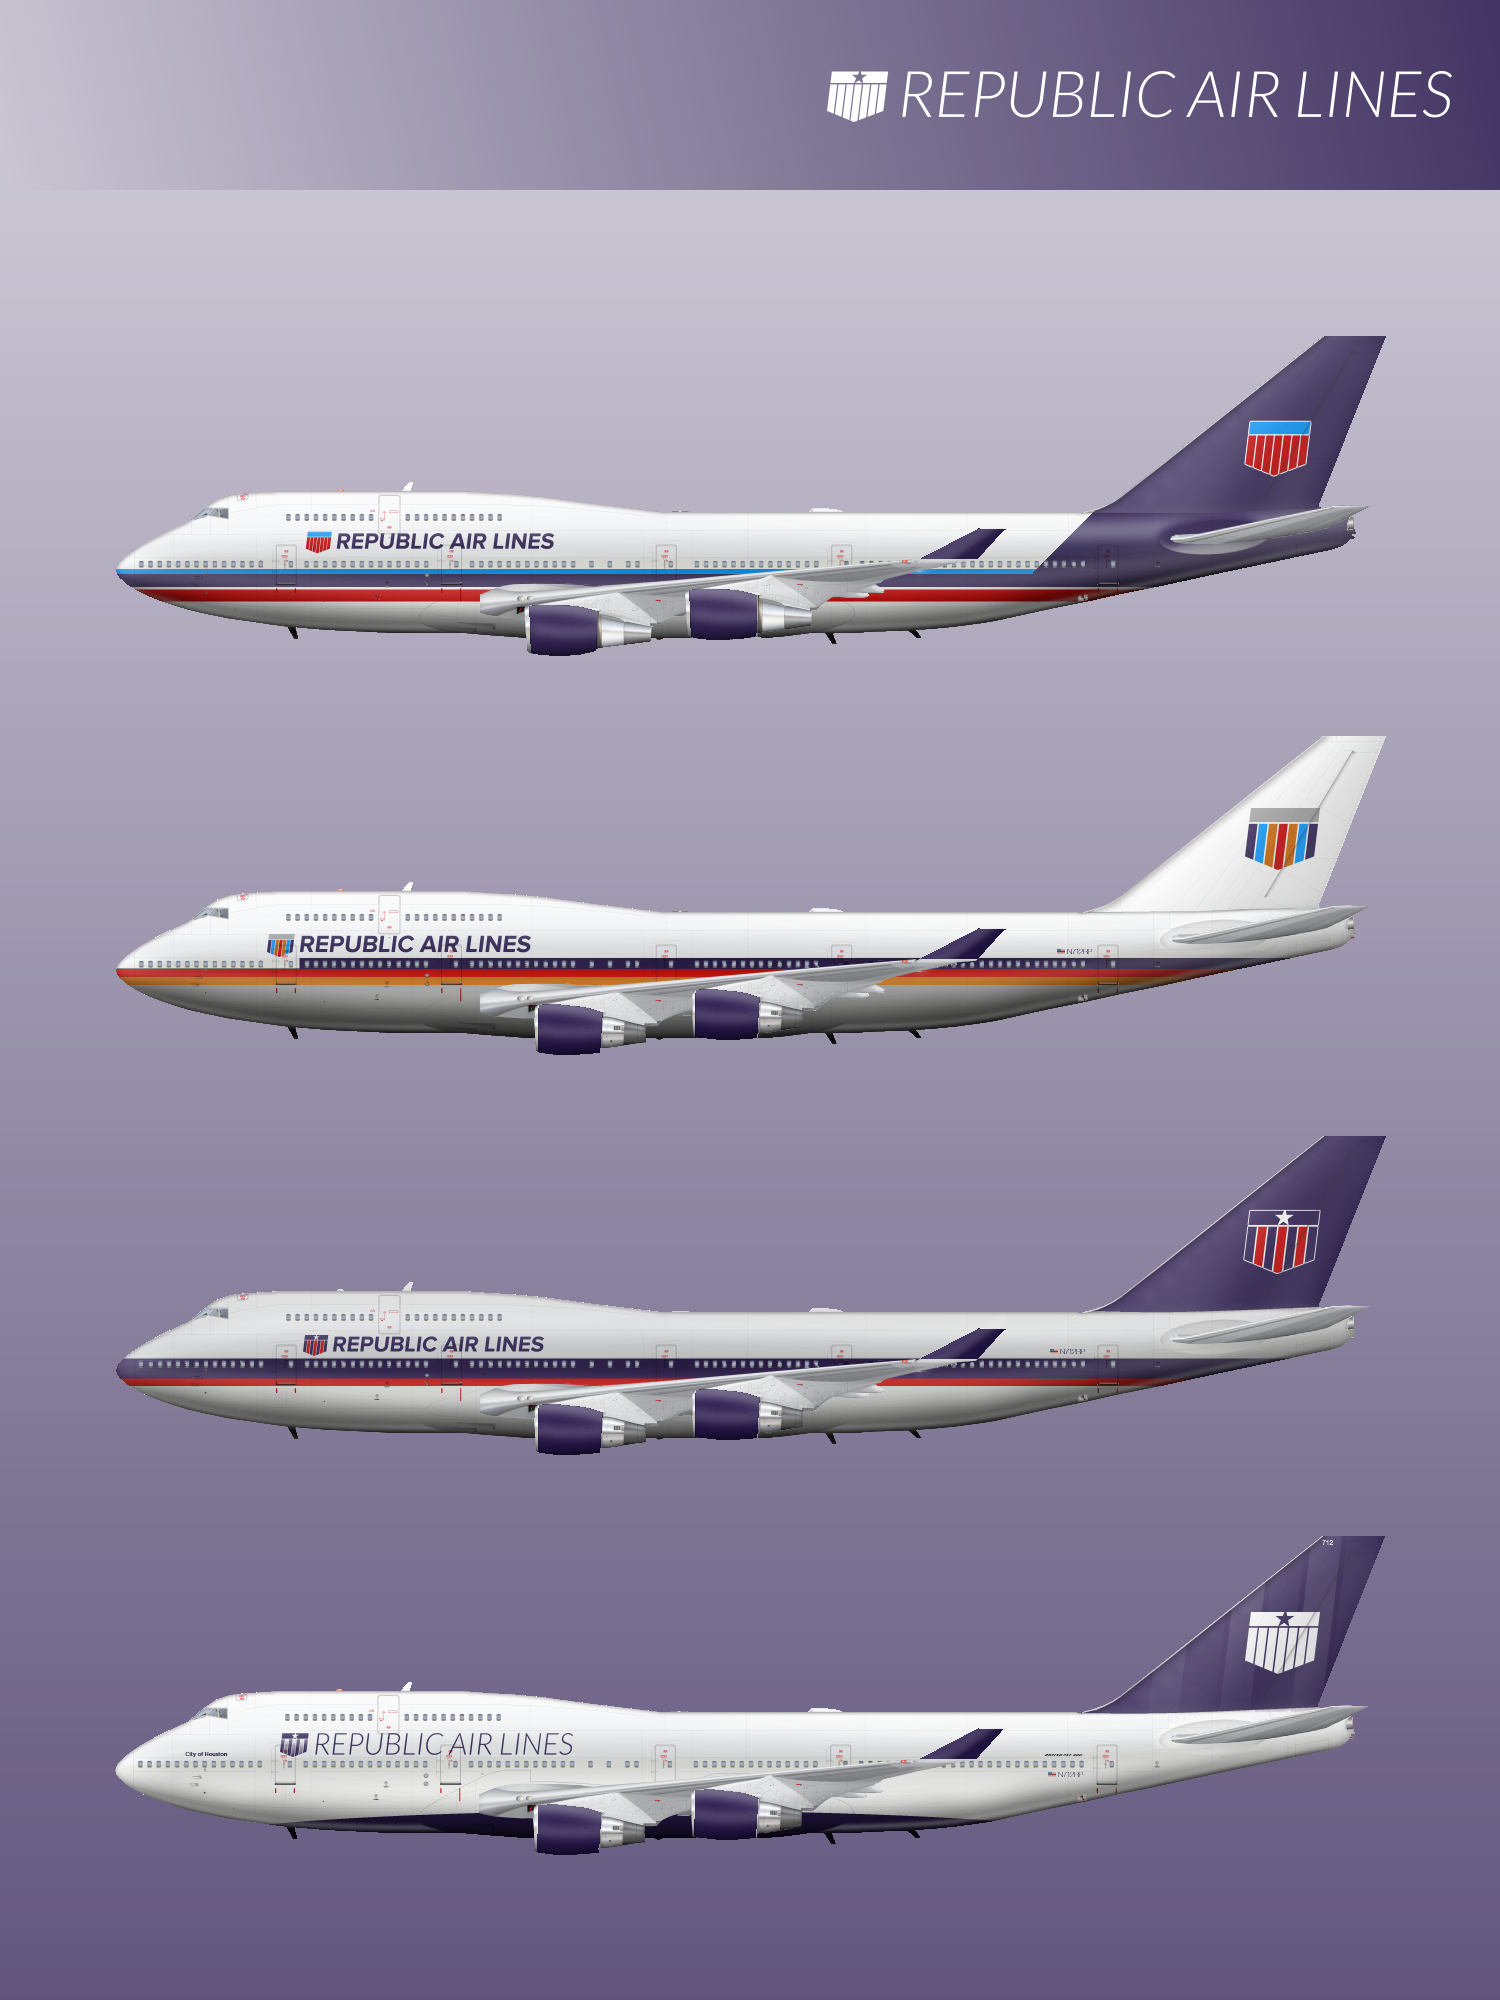 Republic Air Lines Livery History ⓄⒼⒼⒺⓎ Old Gallery Airline